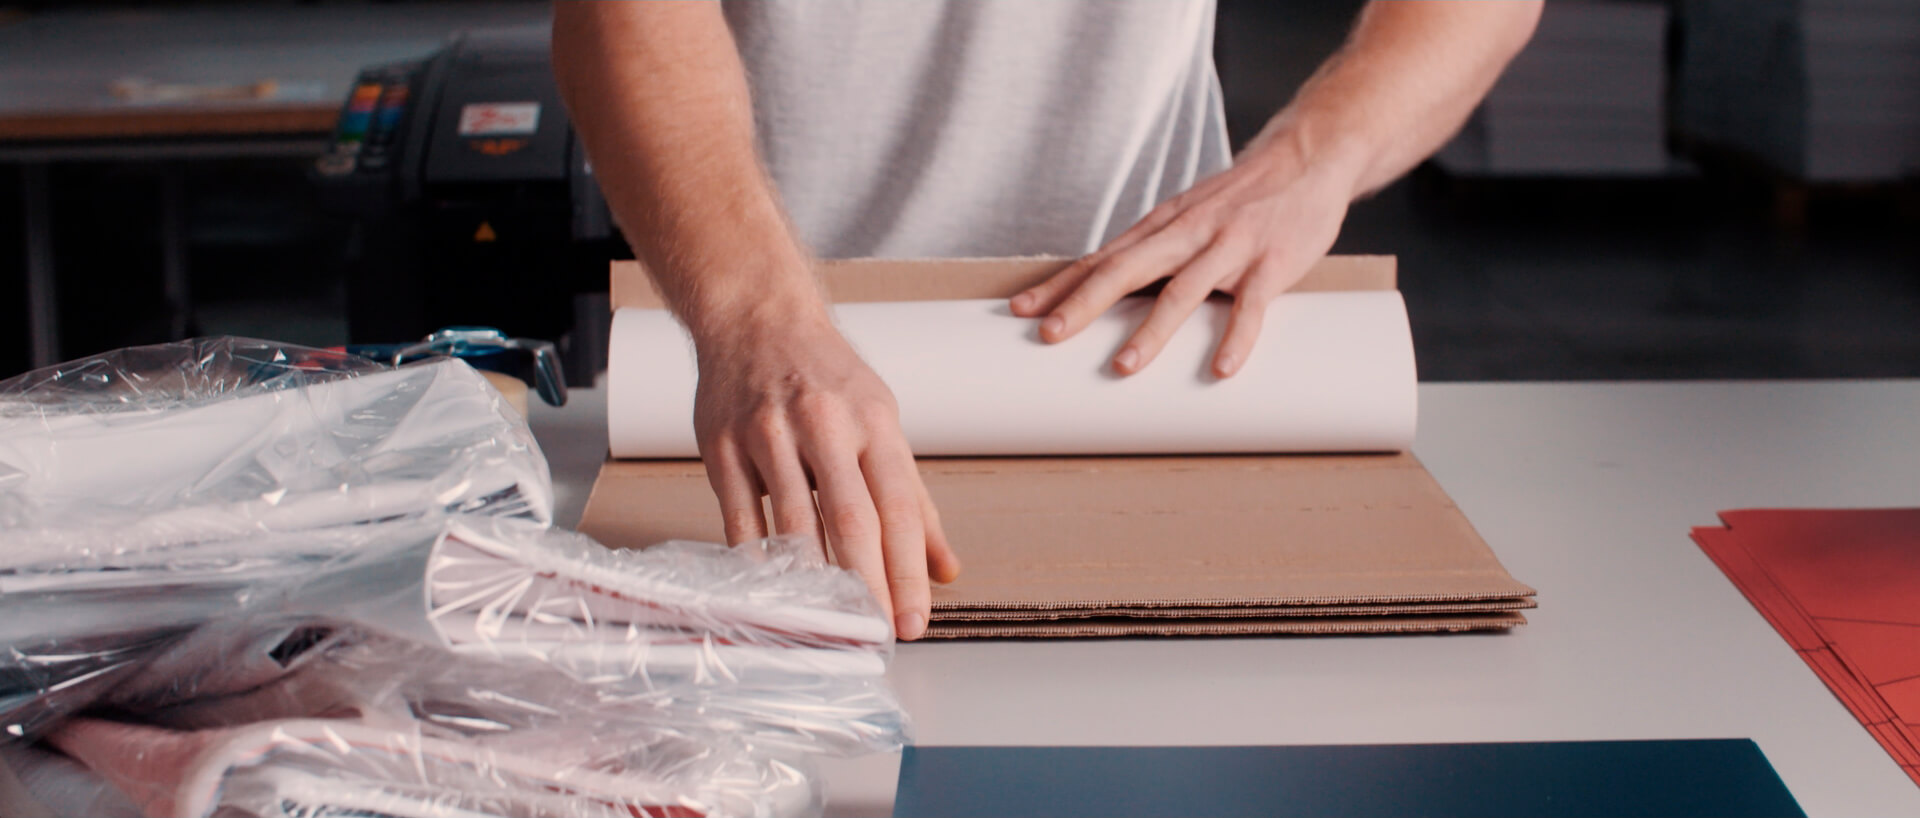 Man packing printed products